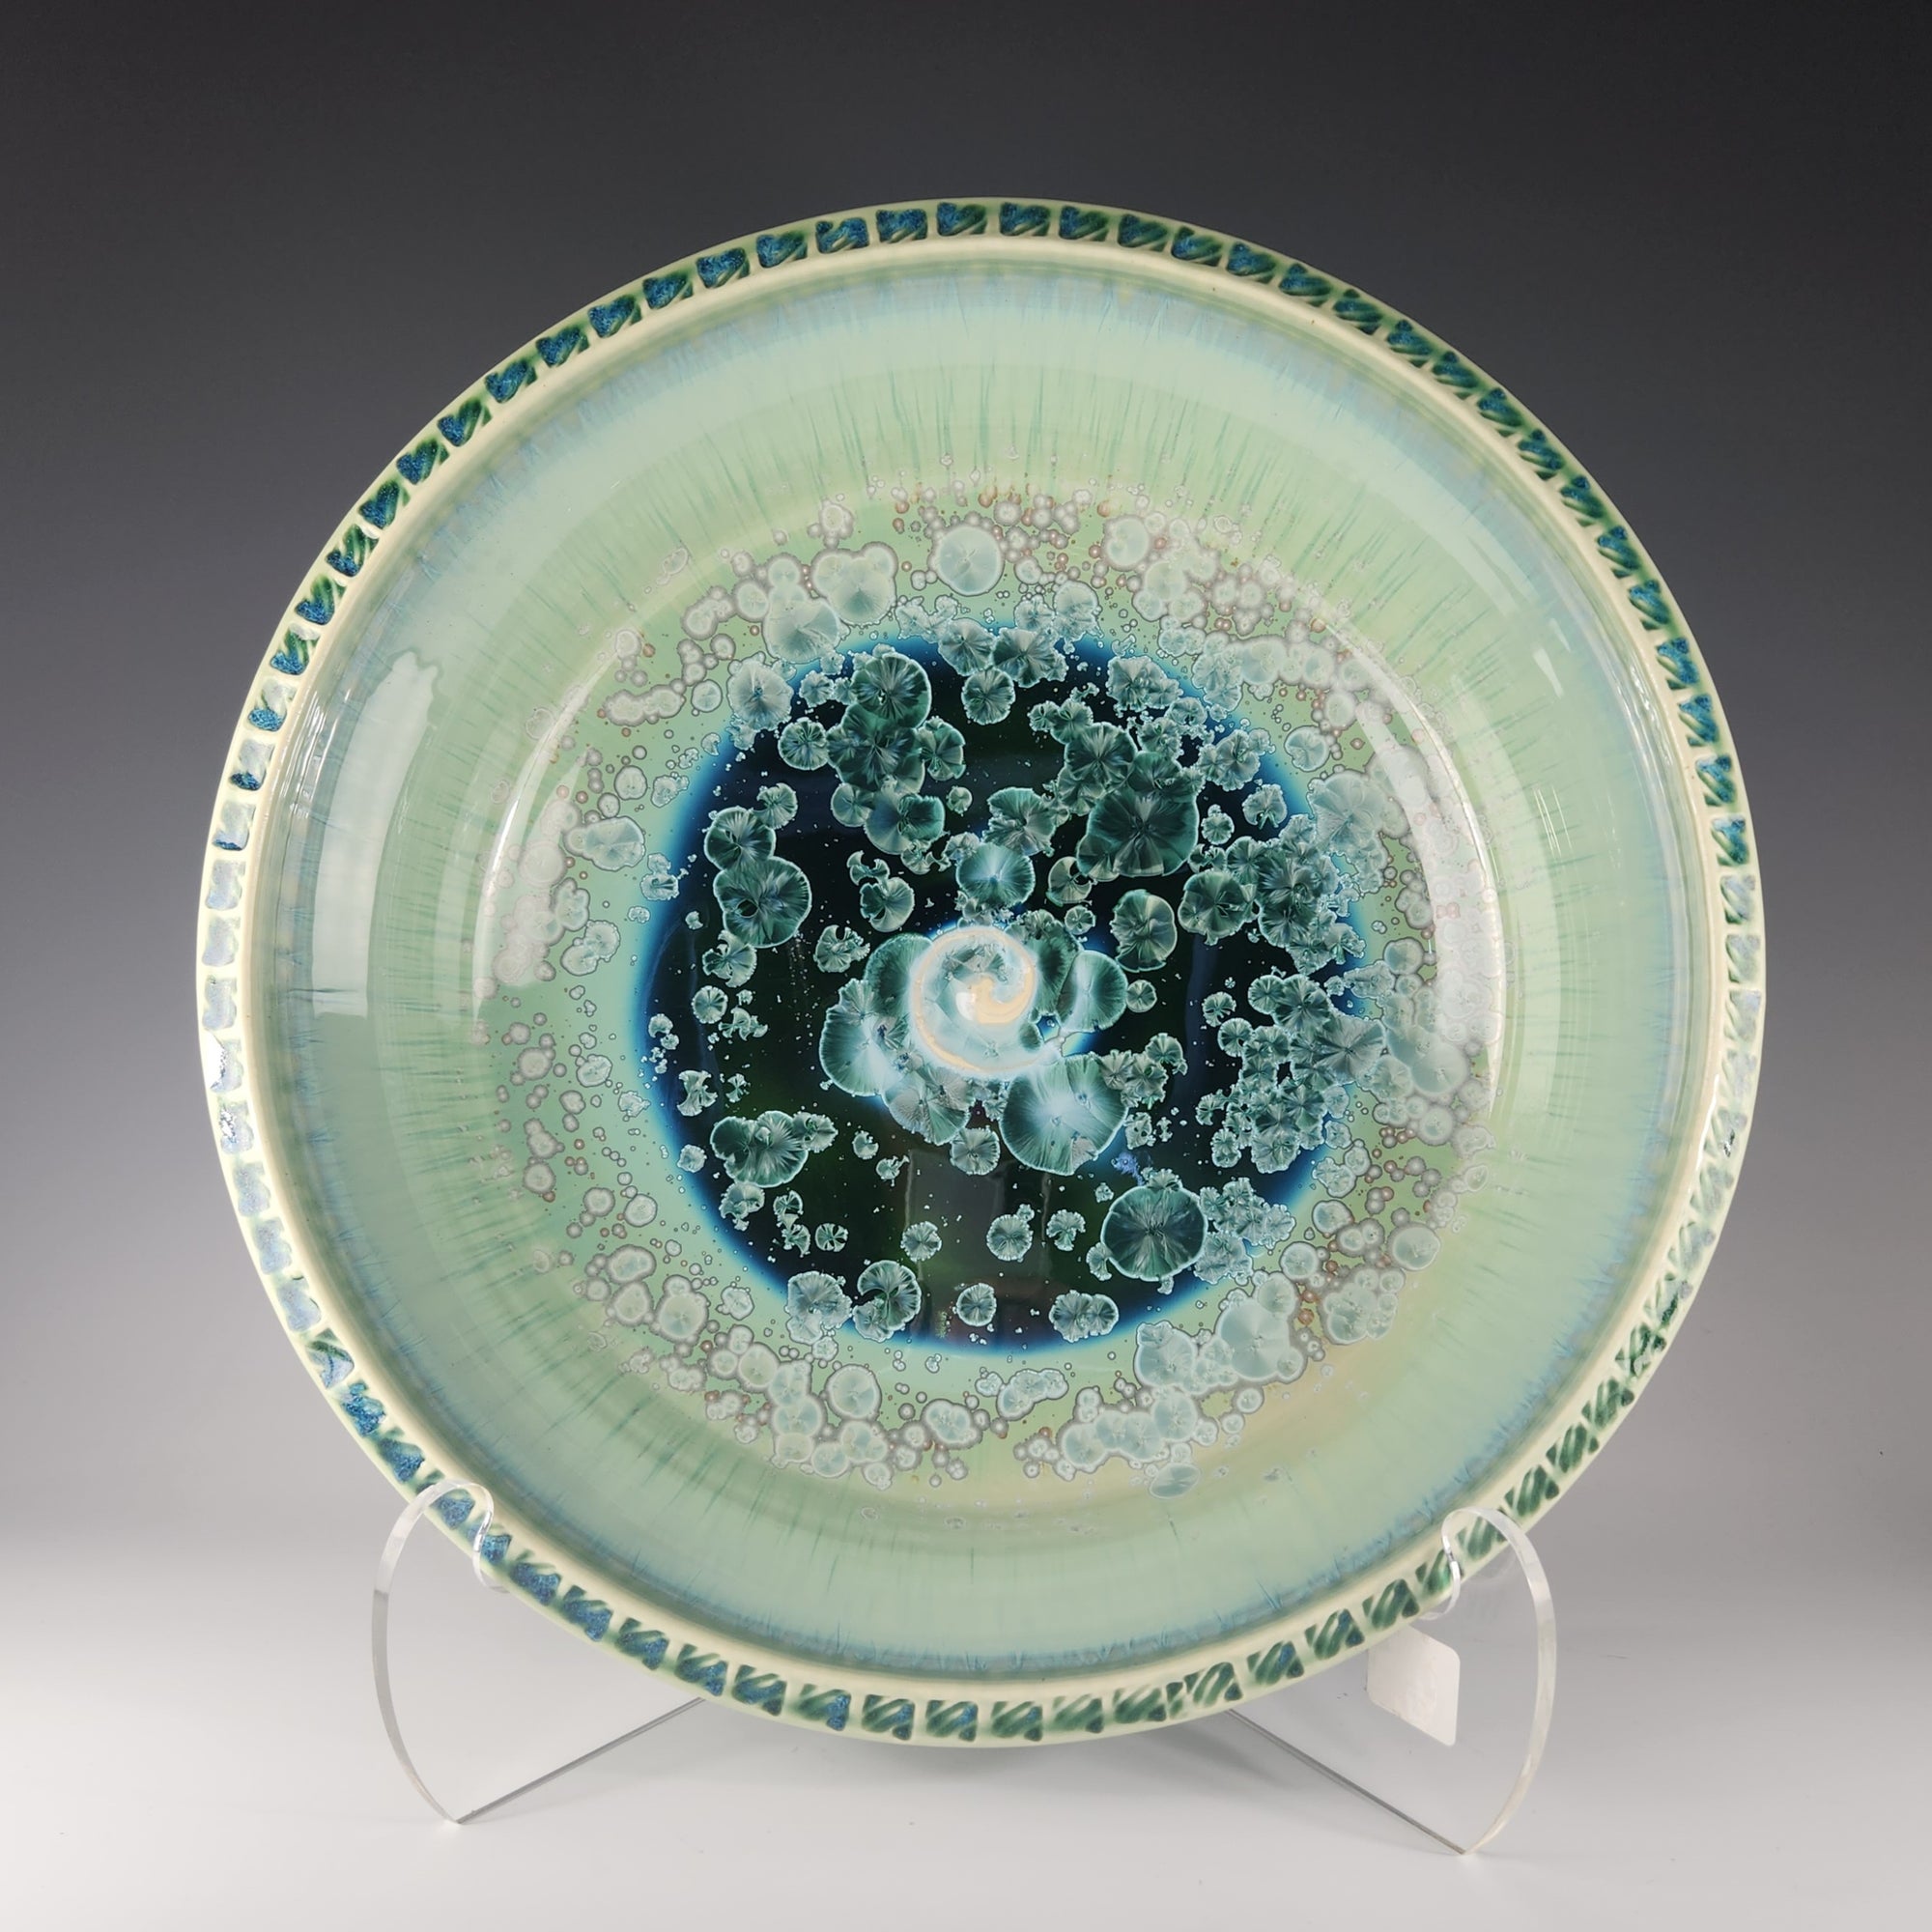 Large Textured-Rim Platter in Patina Green - Heart of the Home PA